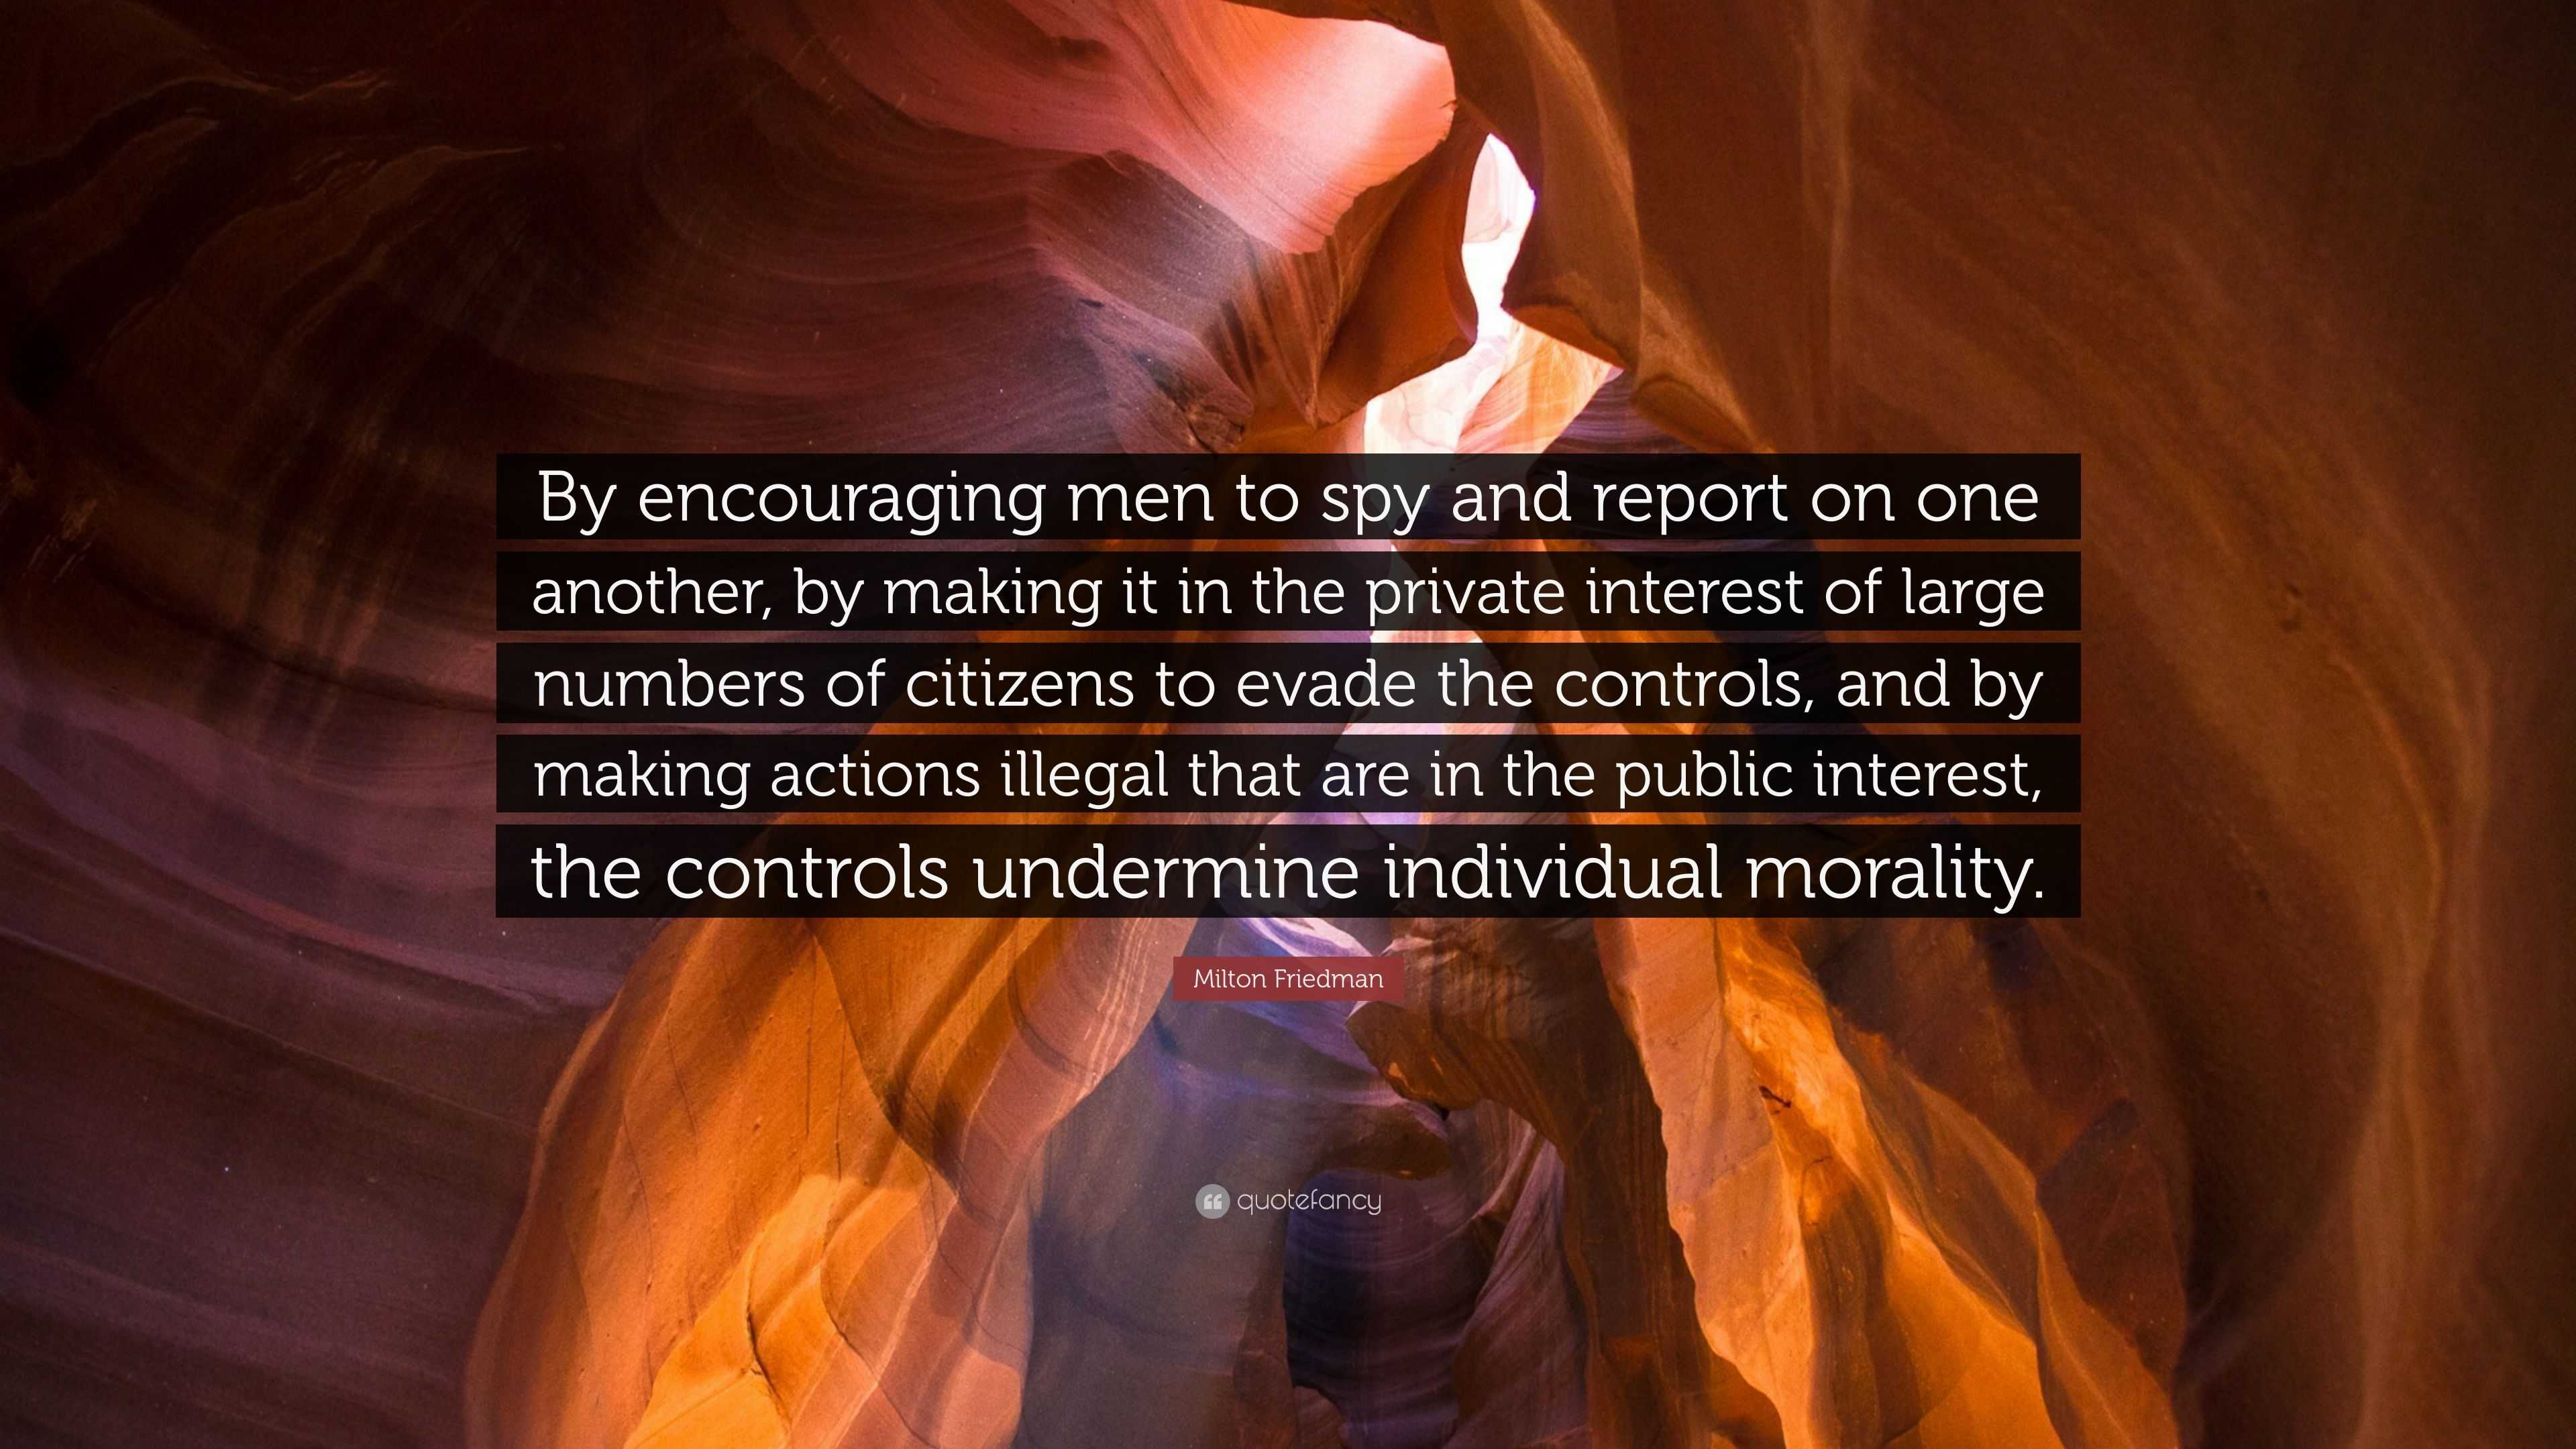 Milton Friedman Quote: “By encouraging men to spy and report on one  another, by making it in the private interest of large numbers of citizens  t”